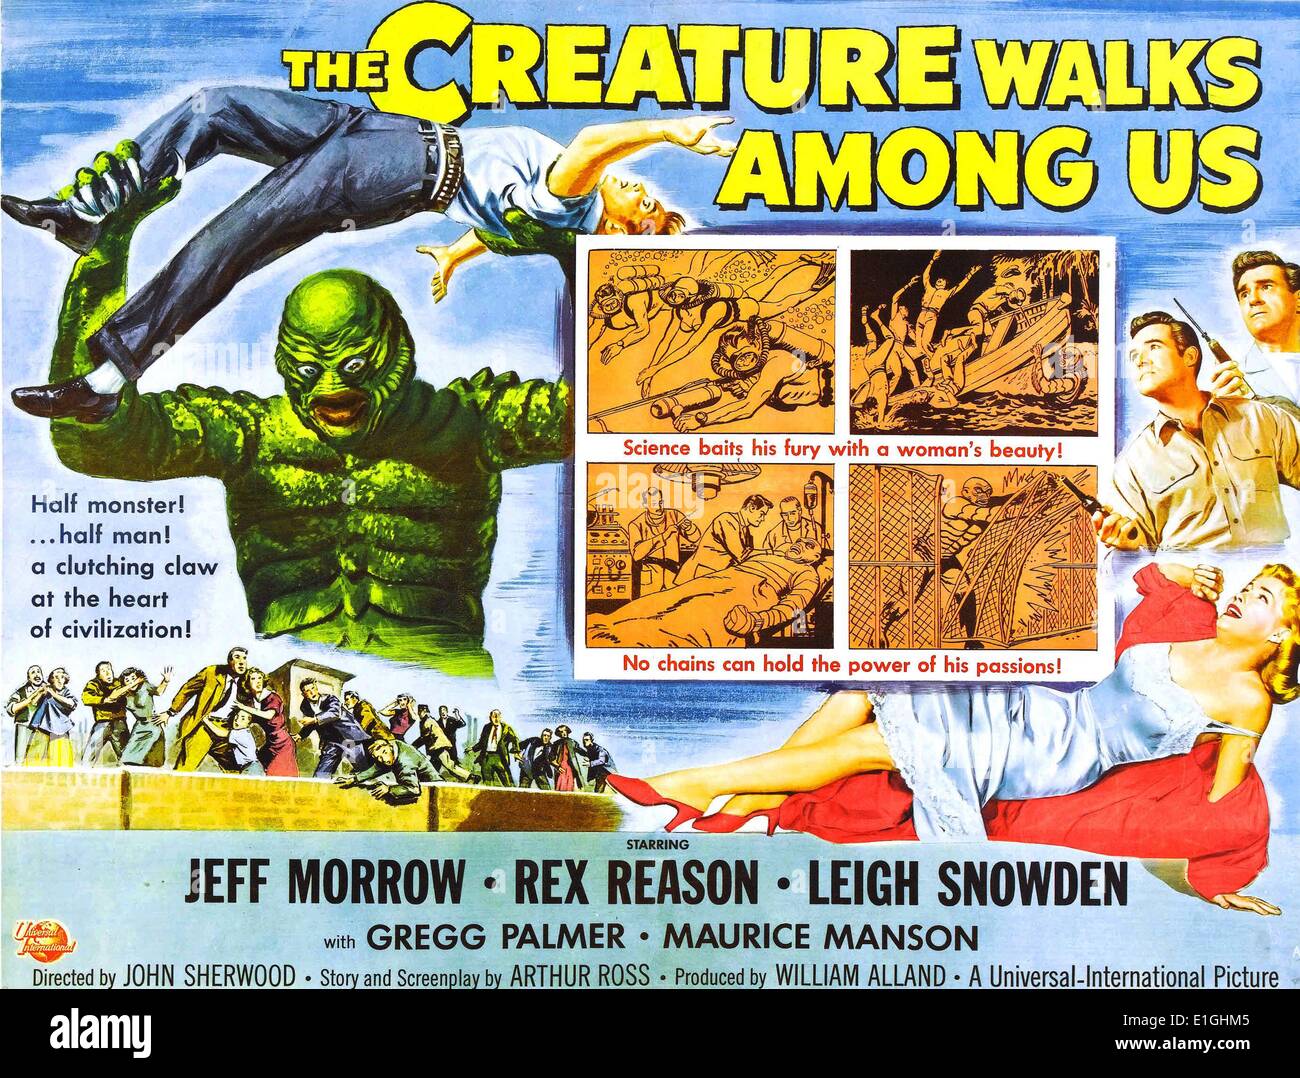 The Creature Walks Among Us is the final installment of the Creature from the Black Lagoon horror film series, released in 1956. It stars Ricou Browning. Stock Photo